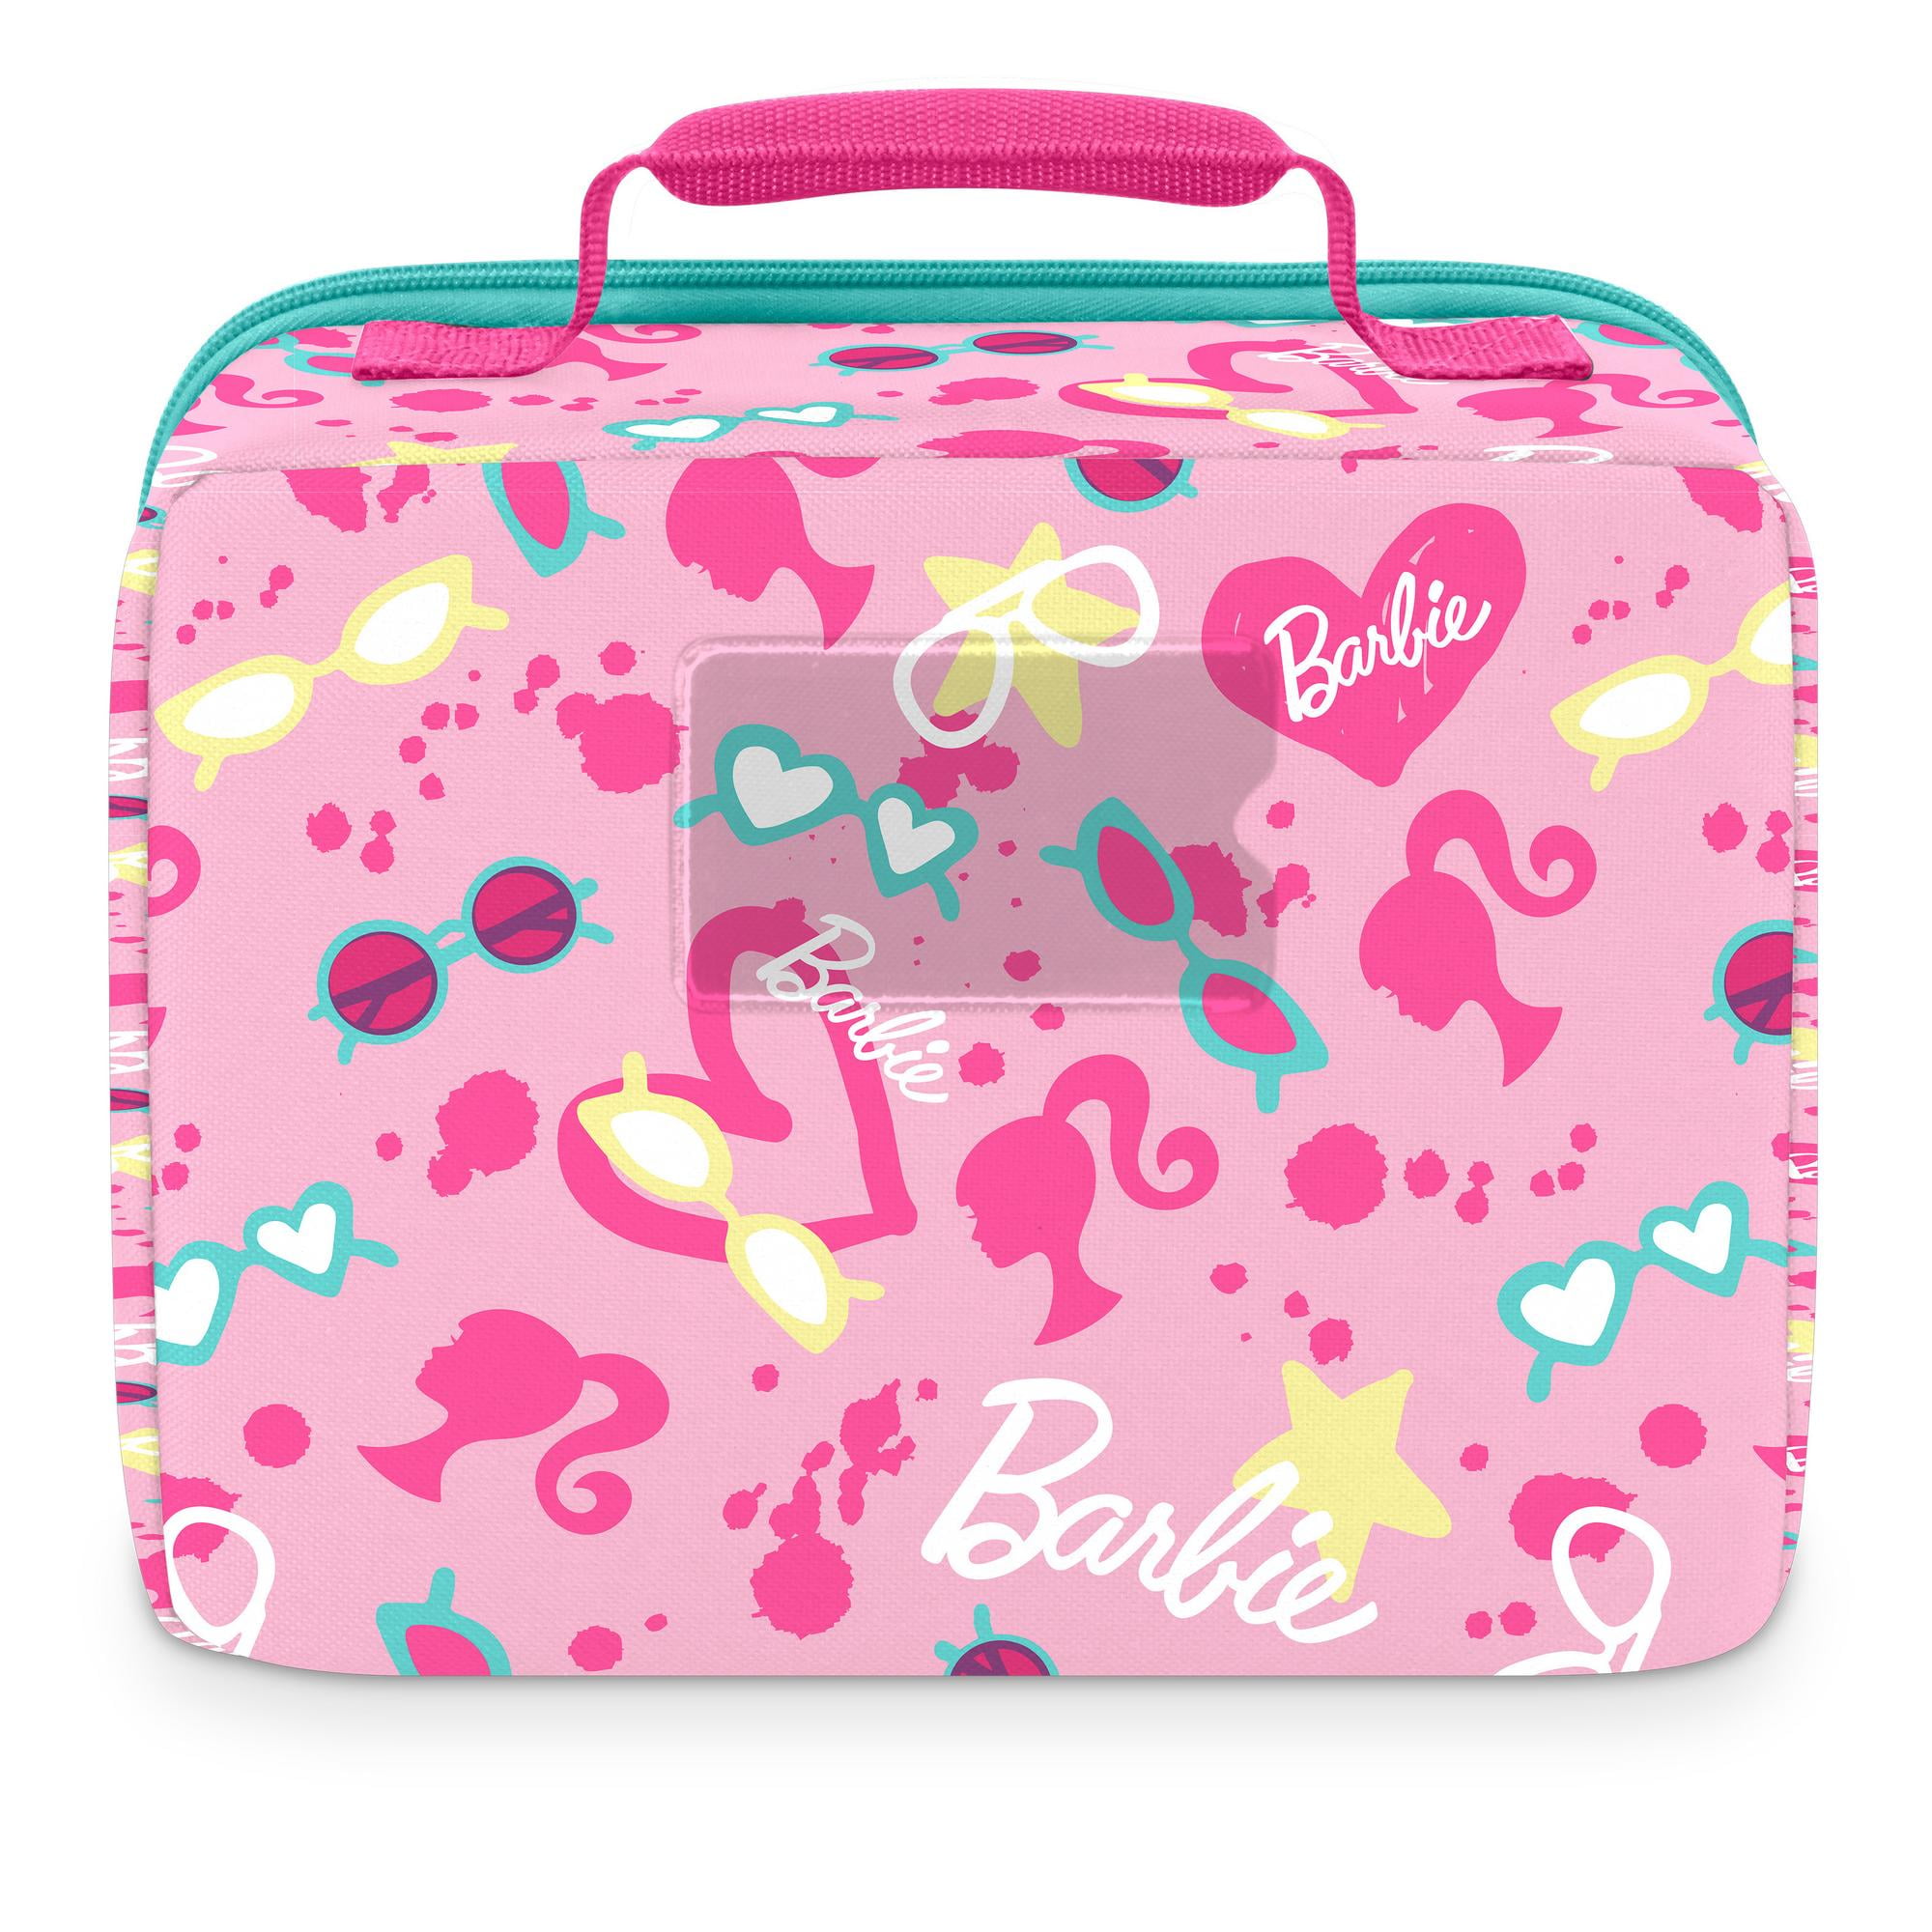 Thermos Standard Reusable Lunch Bag, Barbie